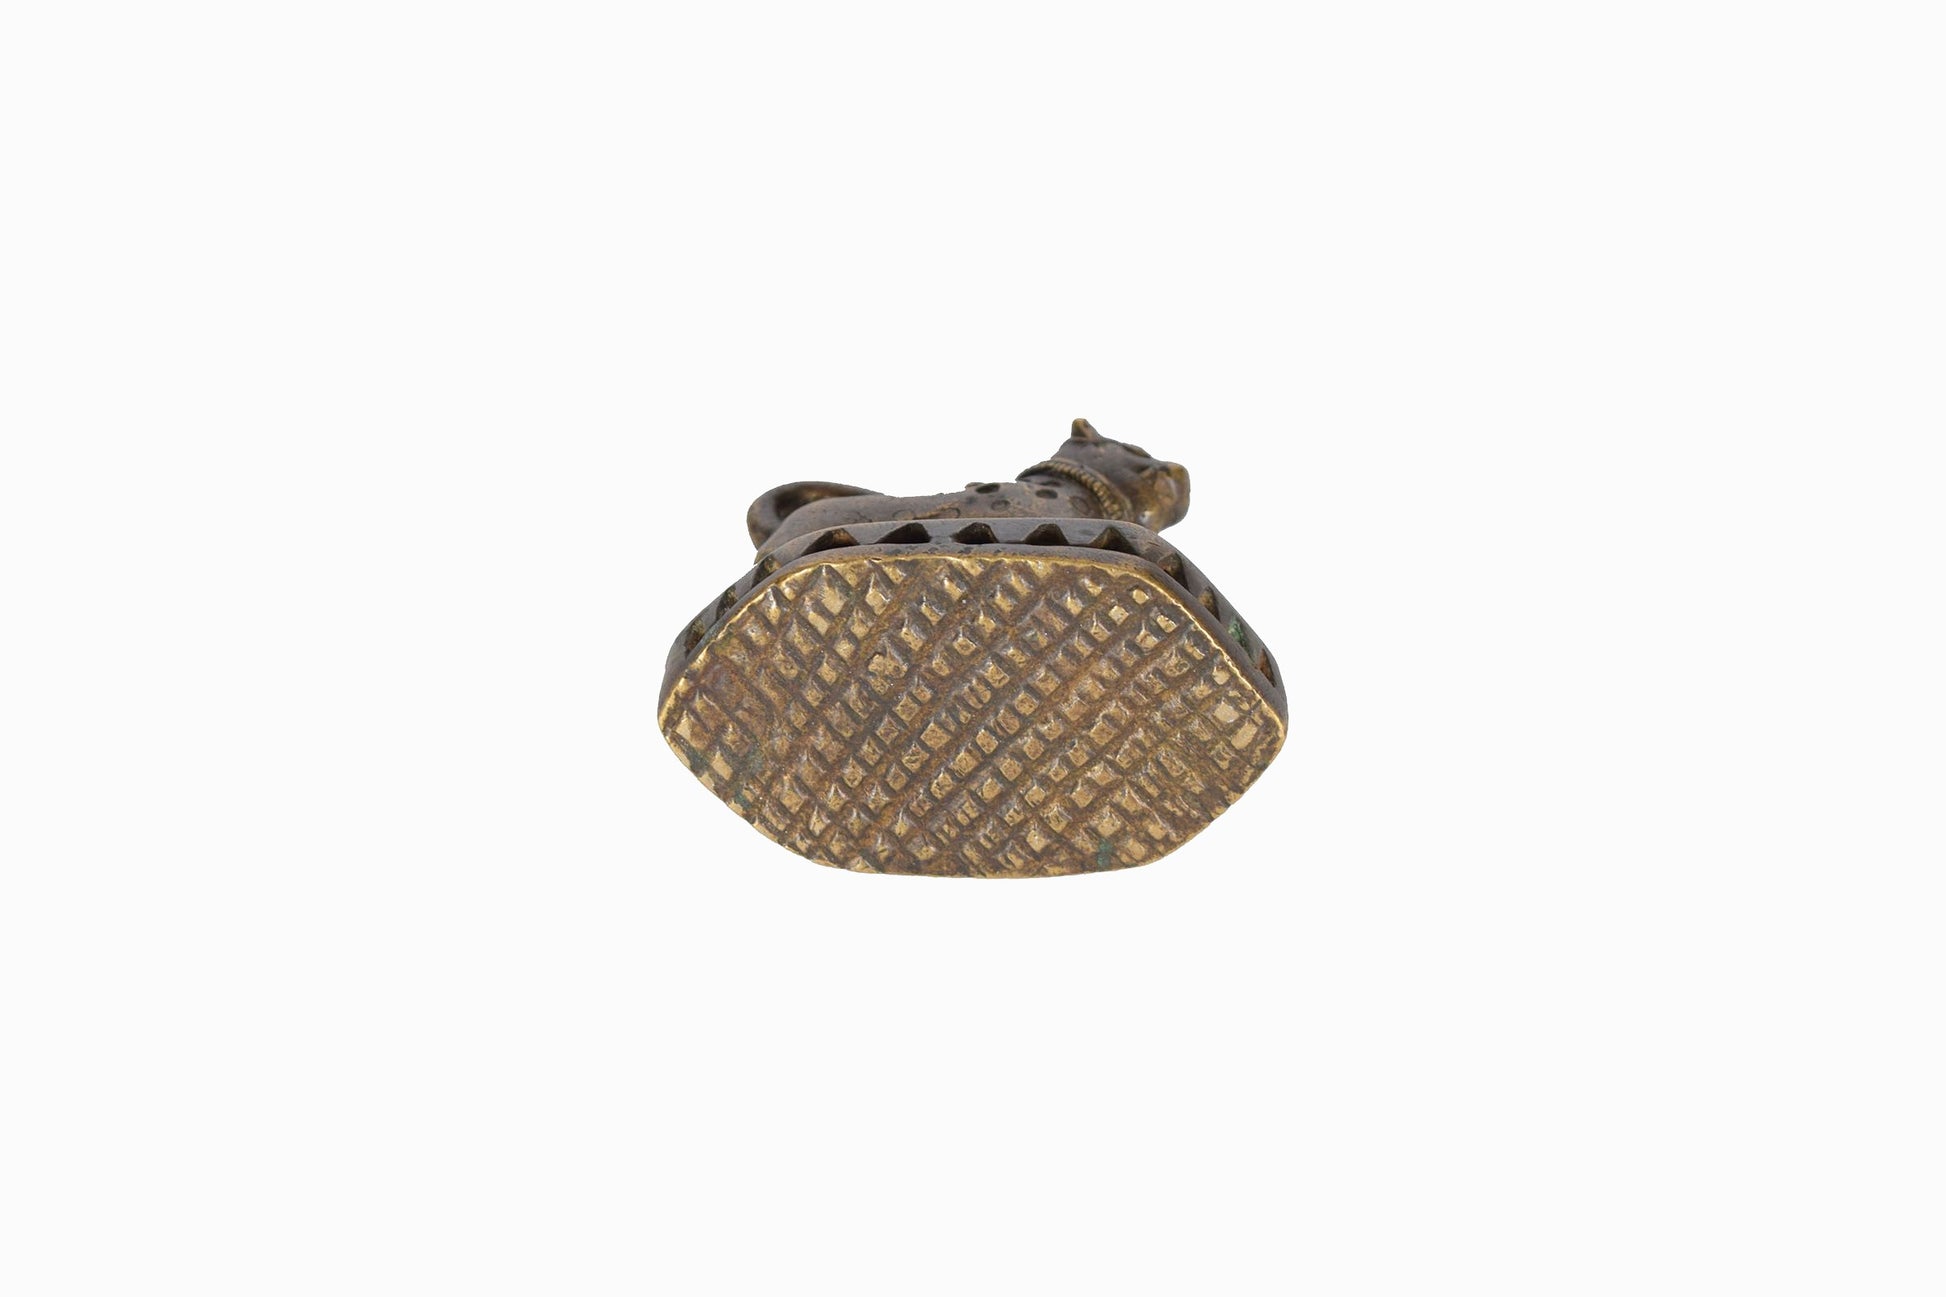 Vintage brass Indian foot scrubber with a leopard handle – Raj